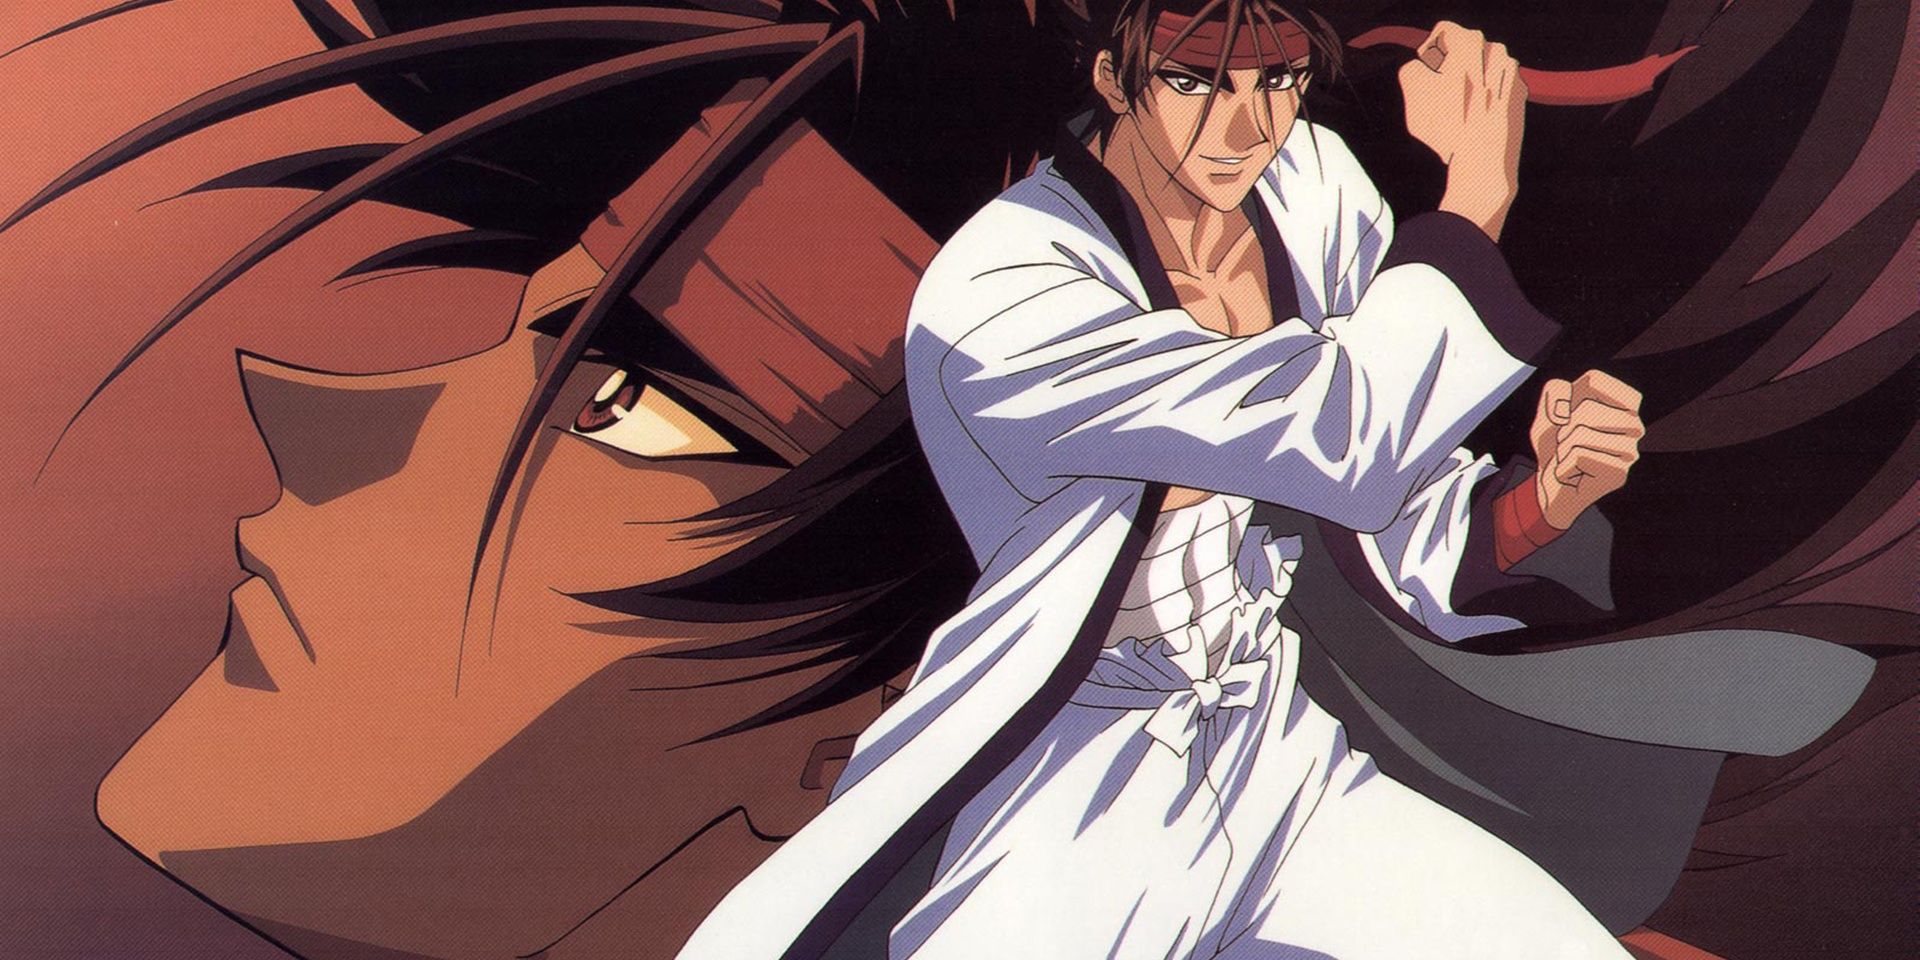 Rurouni Kenshin 5 Things That Were Historically Accurate About Japanese History (& 5 Things That Aren’t)